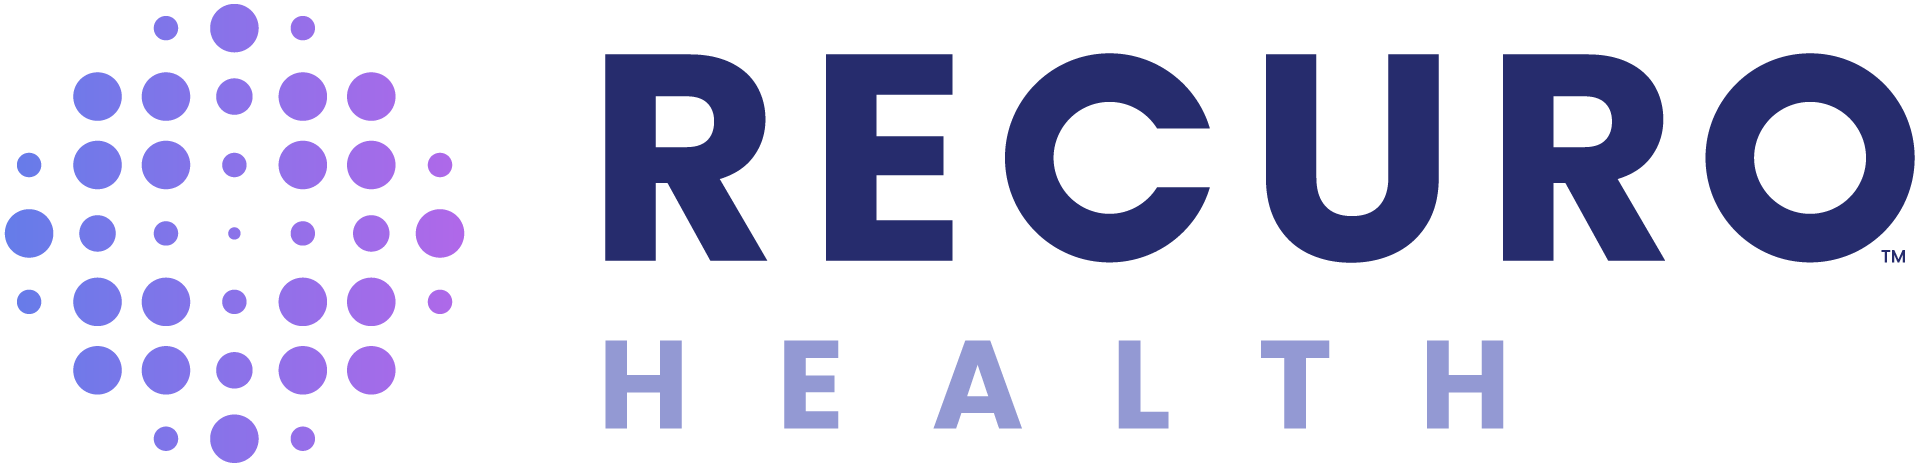 Recuro Health | Making Advanced Healthcare Accessible™